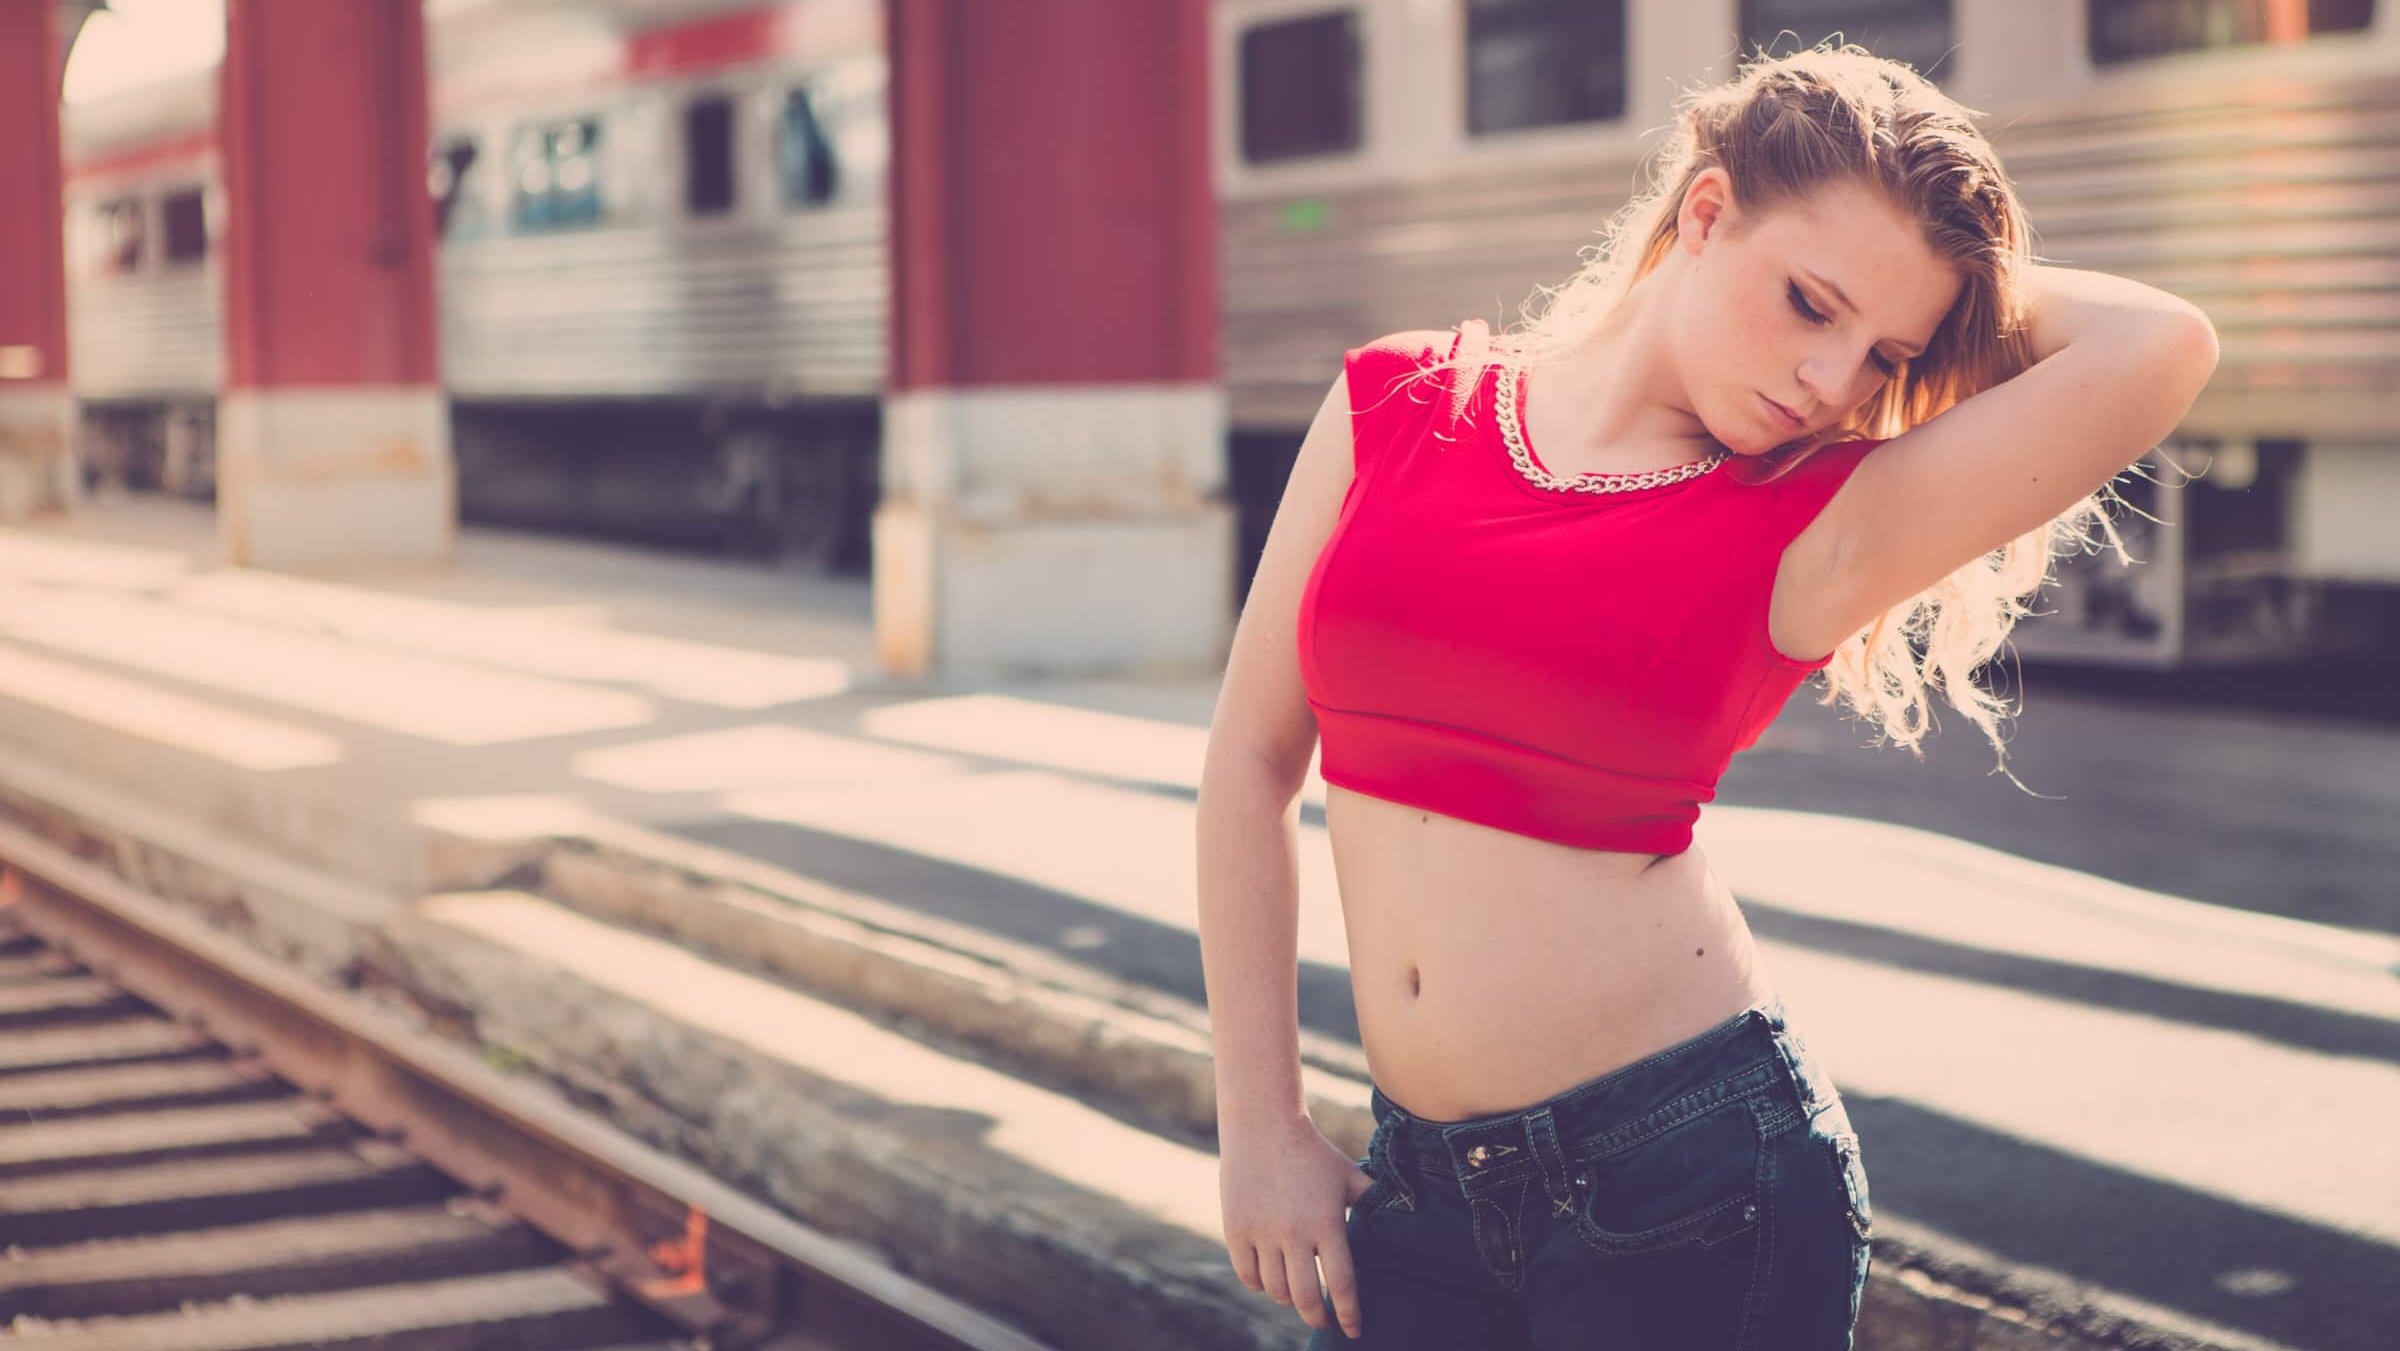 People 2400x1351 red shirt crop top bare midriff belly belly button innie navel low rise jeans jeans depth of field blonde train train station women